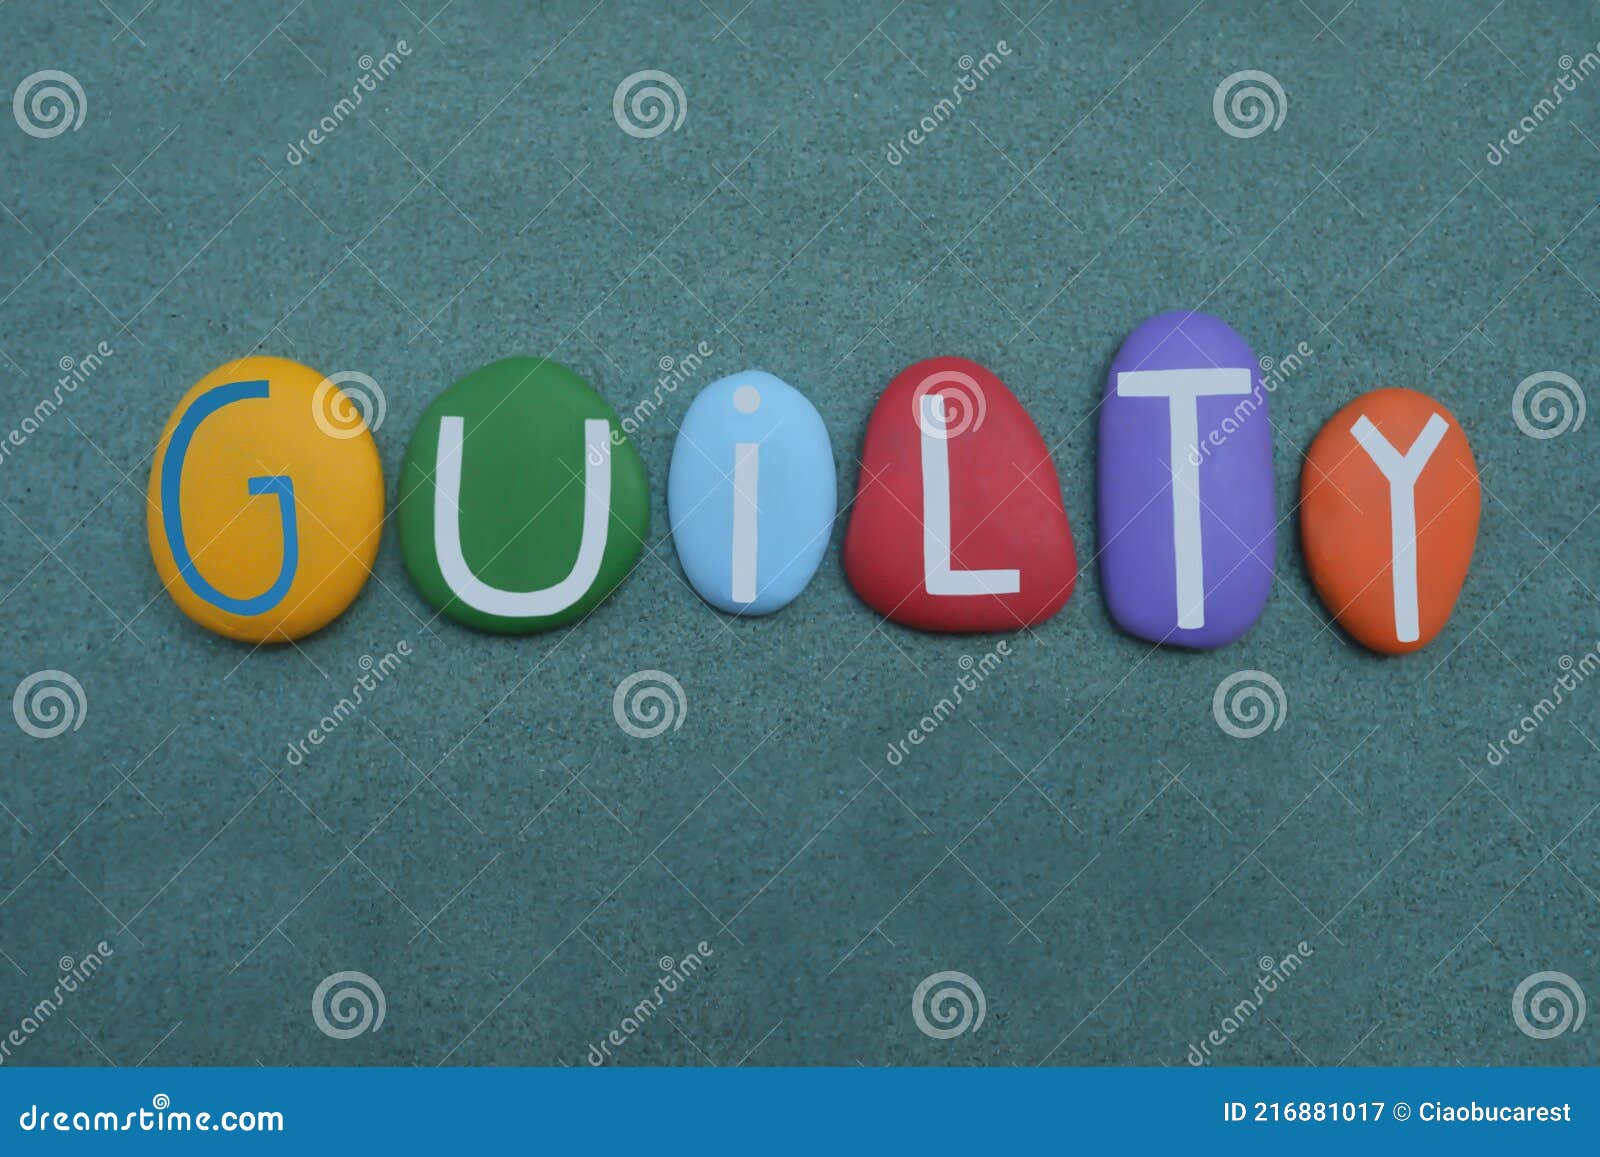 guilty word composed with multi colored stone letters over green sand